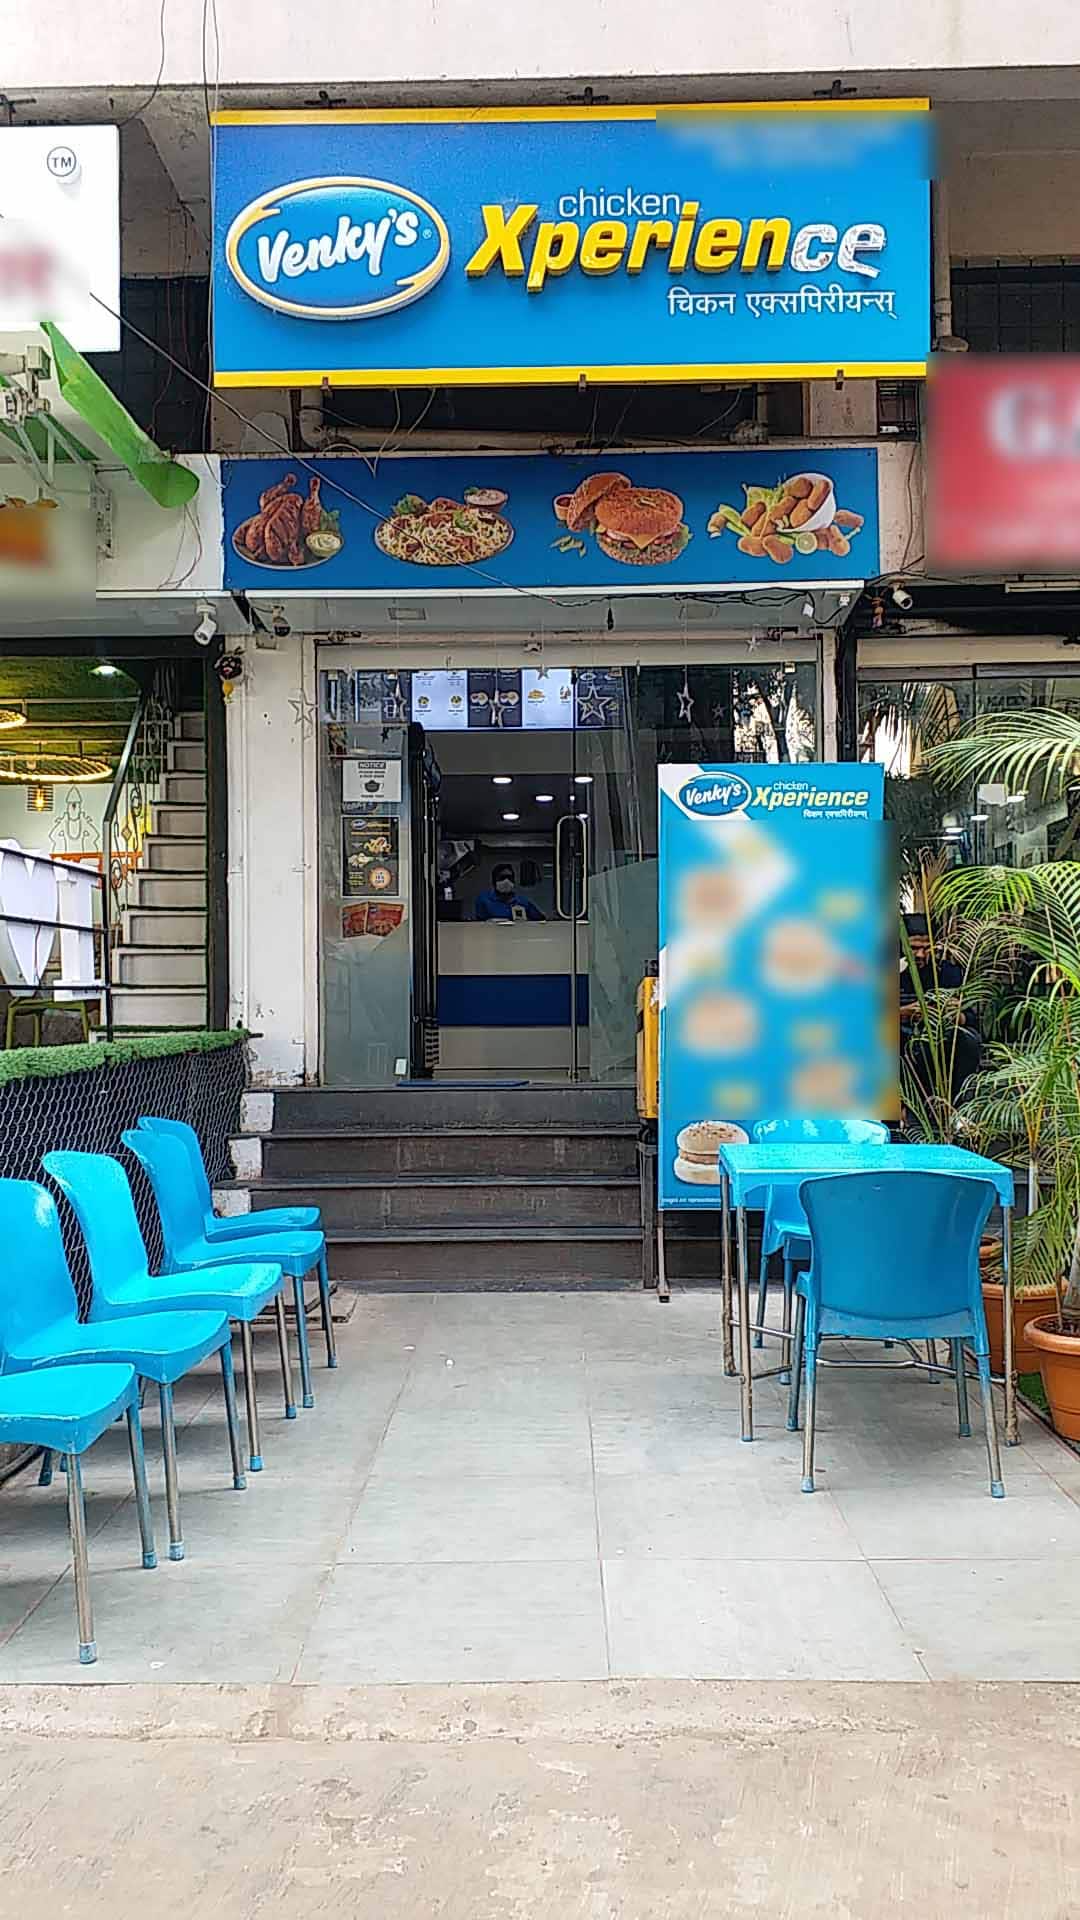 Freezer to Microwave - Picture of Venky's Xprs, Pune - Tripadvisor